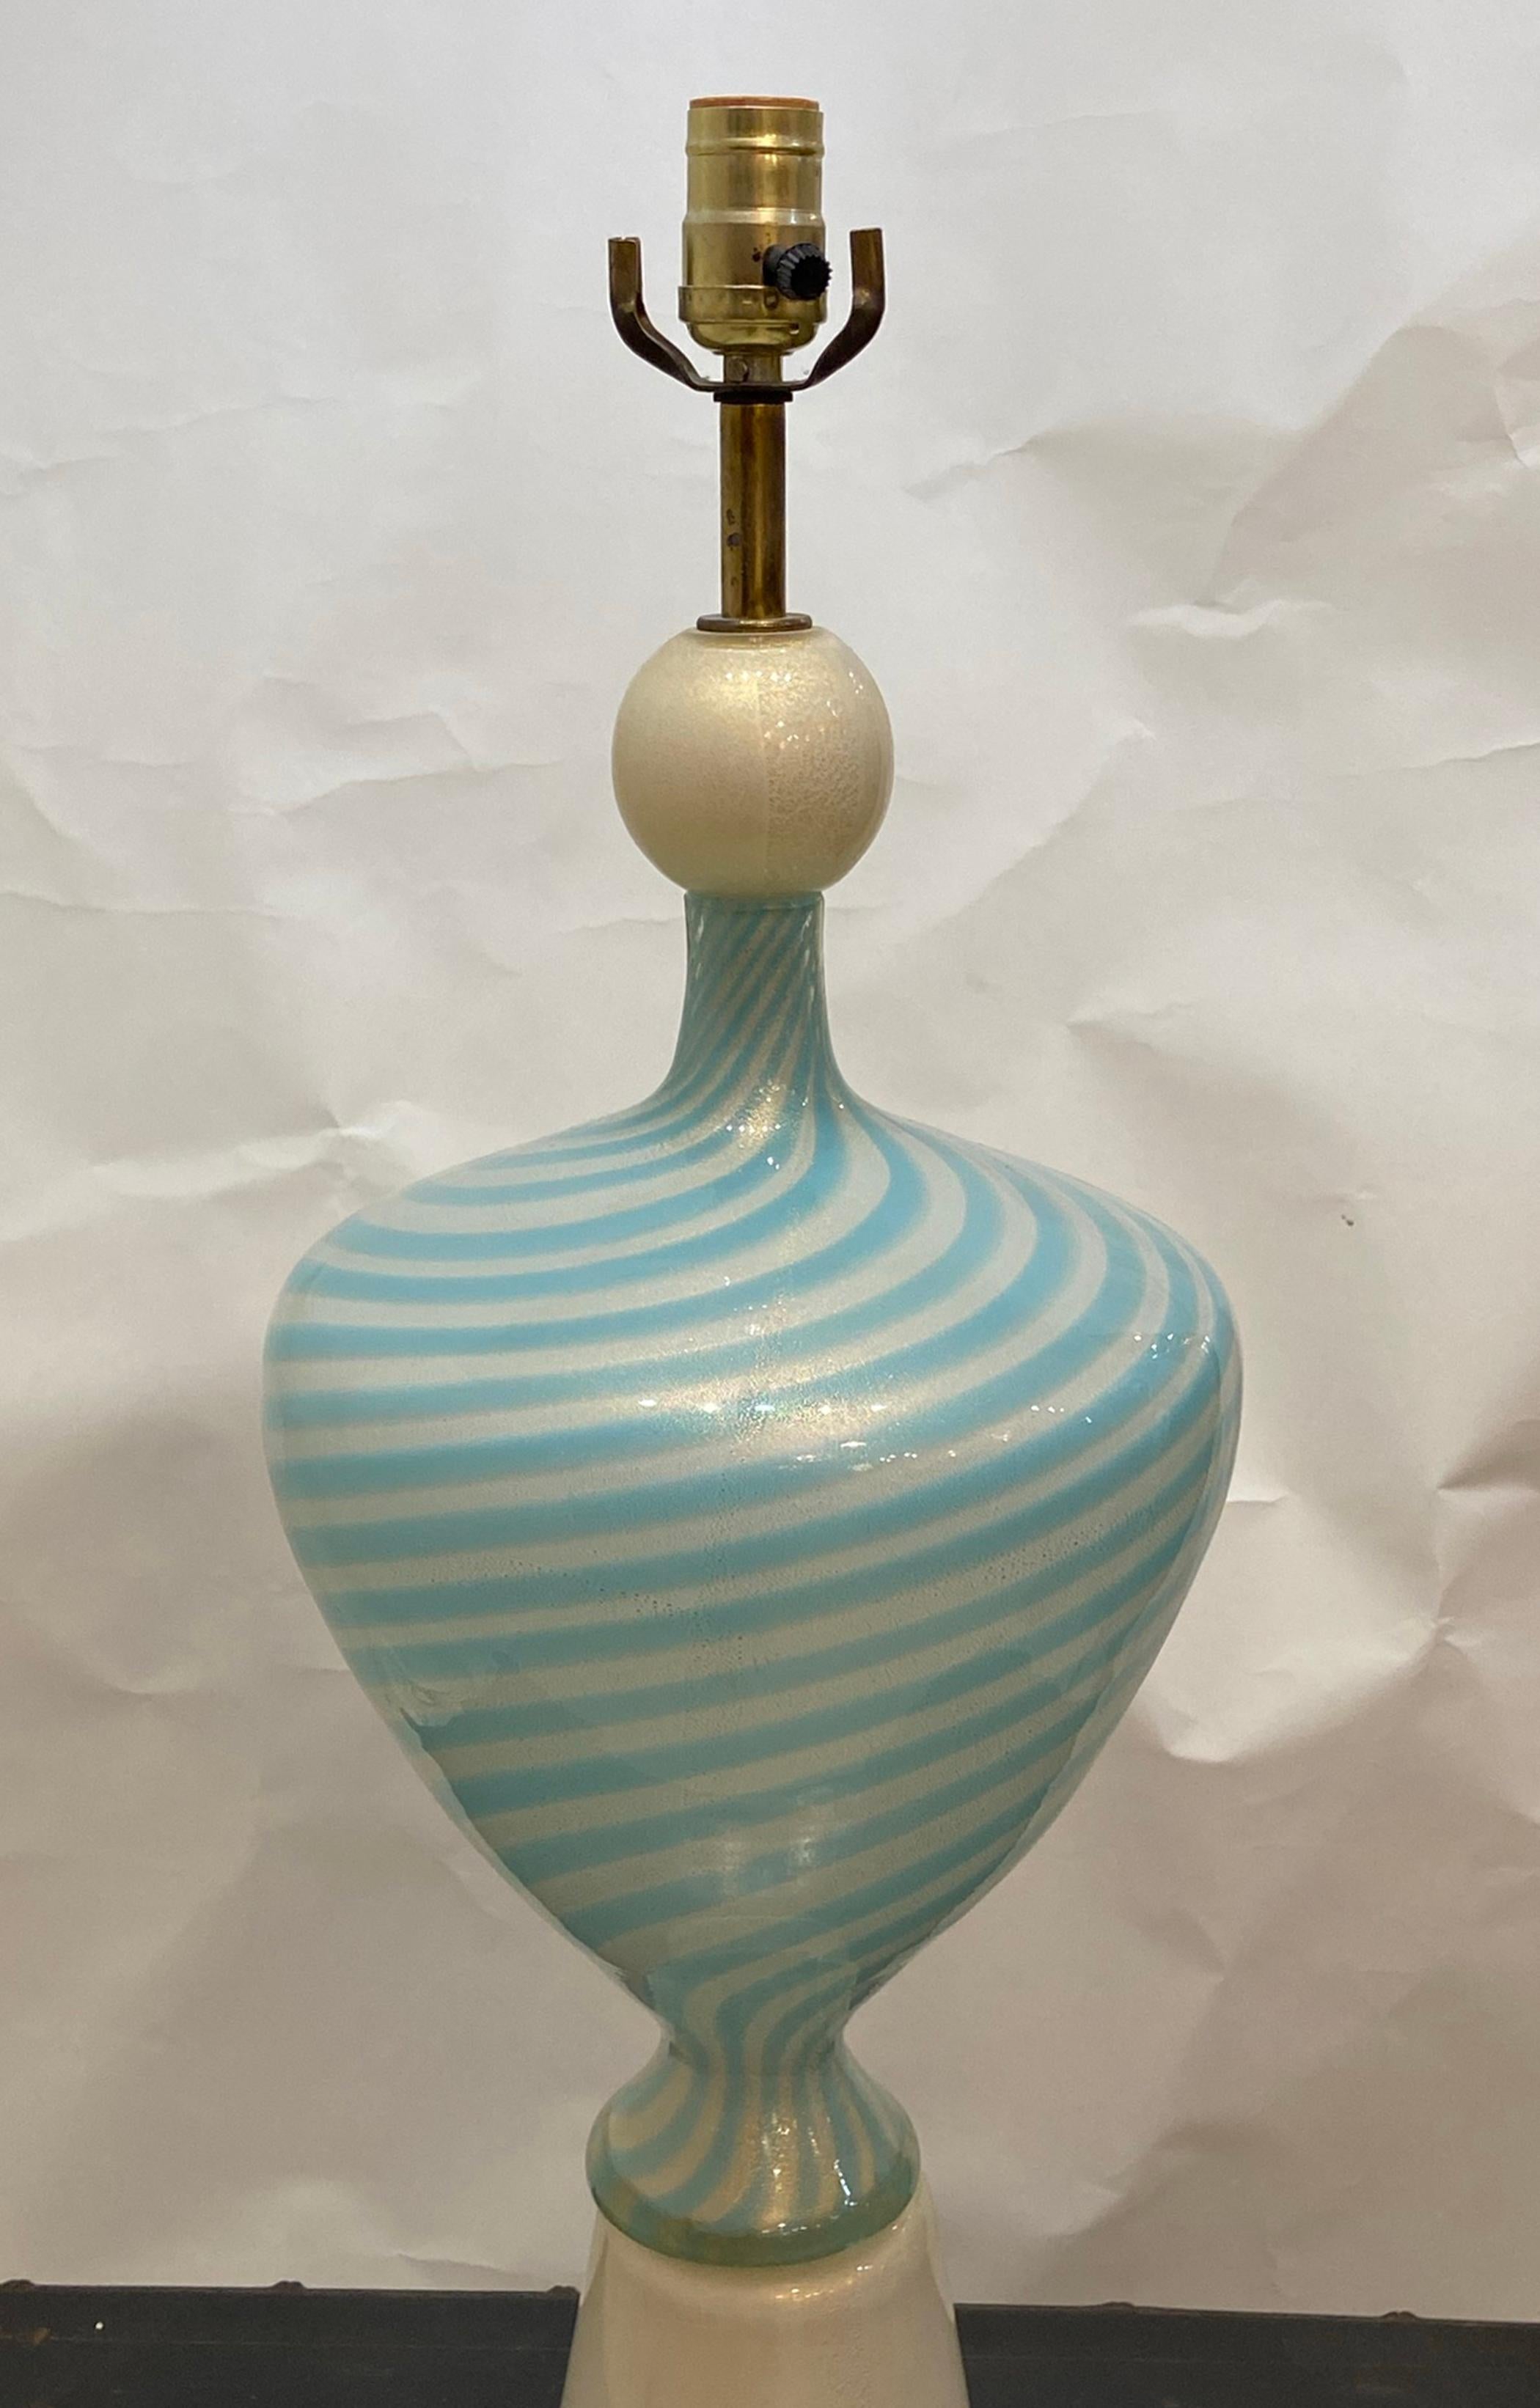 Blue swirl with white accent Murano art glass table lamp. In very good condition good working order ready to use. 30 inches high to top of socket.